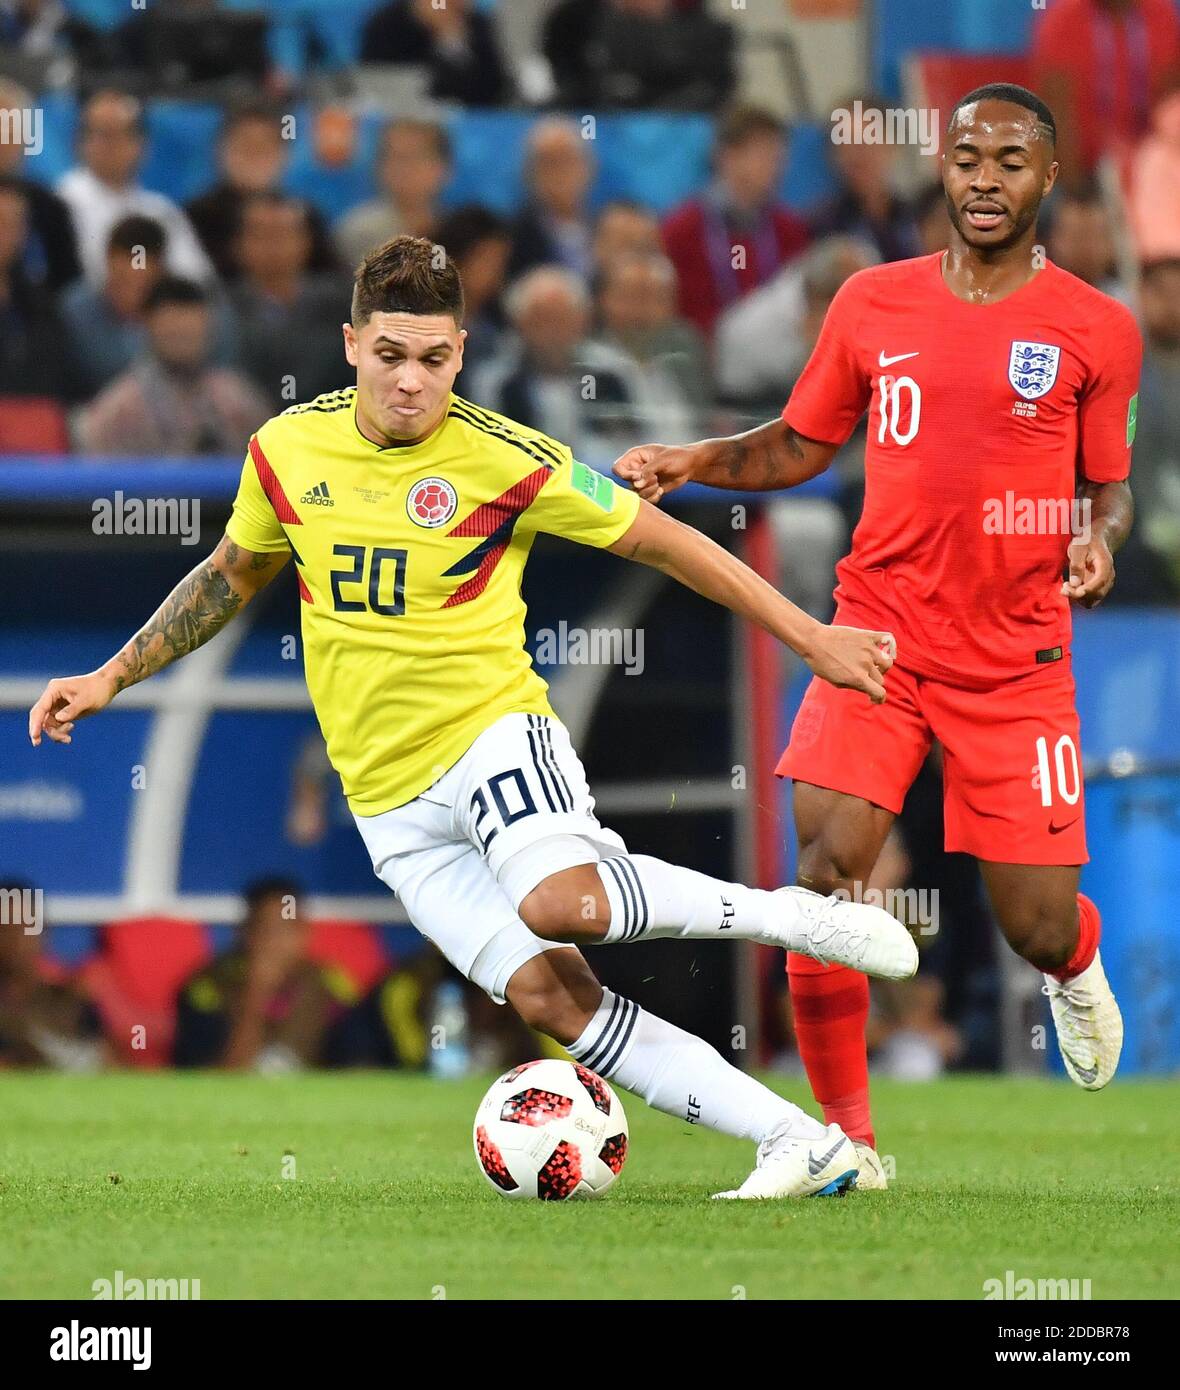 Colombia’s Juan Fernando Quintero and England’s Raheem Sterling during the FIFA World Cup 2018 1/8 final Colombia v England game at the Spartak Stadium, Moscow, Russia, on July 3, 2018. Photo by Christian Liewig/ABACAPRESS.COM Stock Photo